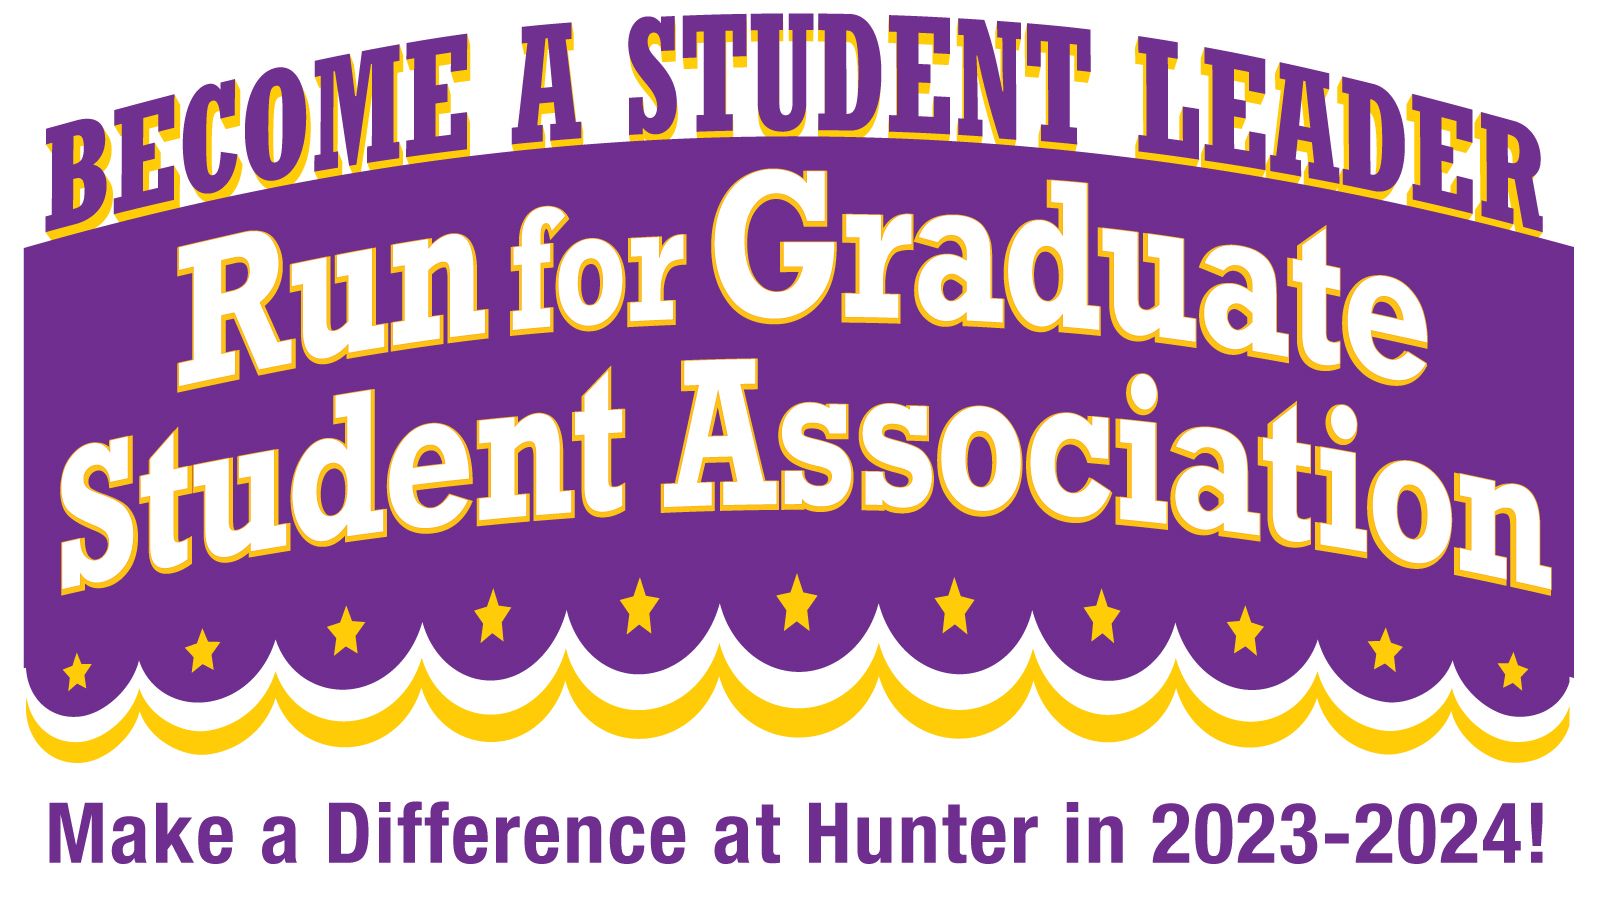 Become a Student Leader! Run for Graduate Student Association!